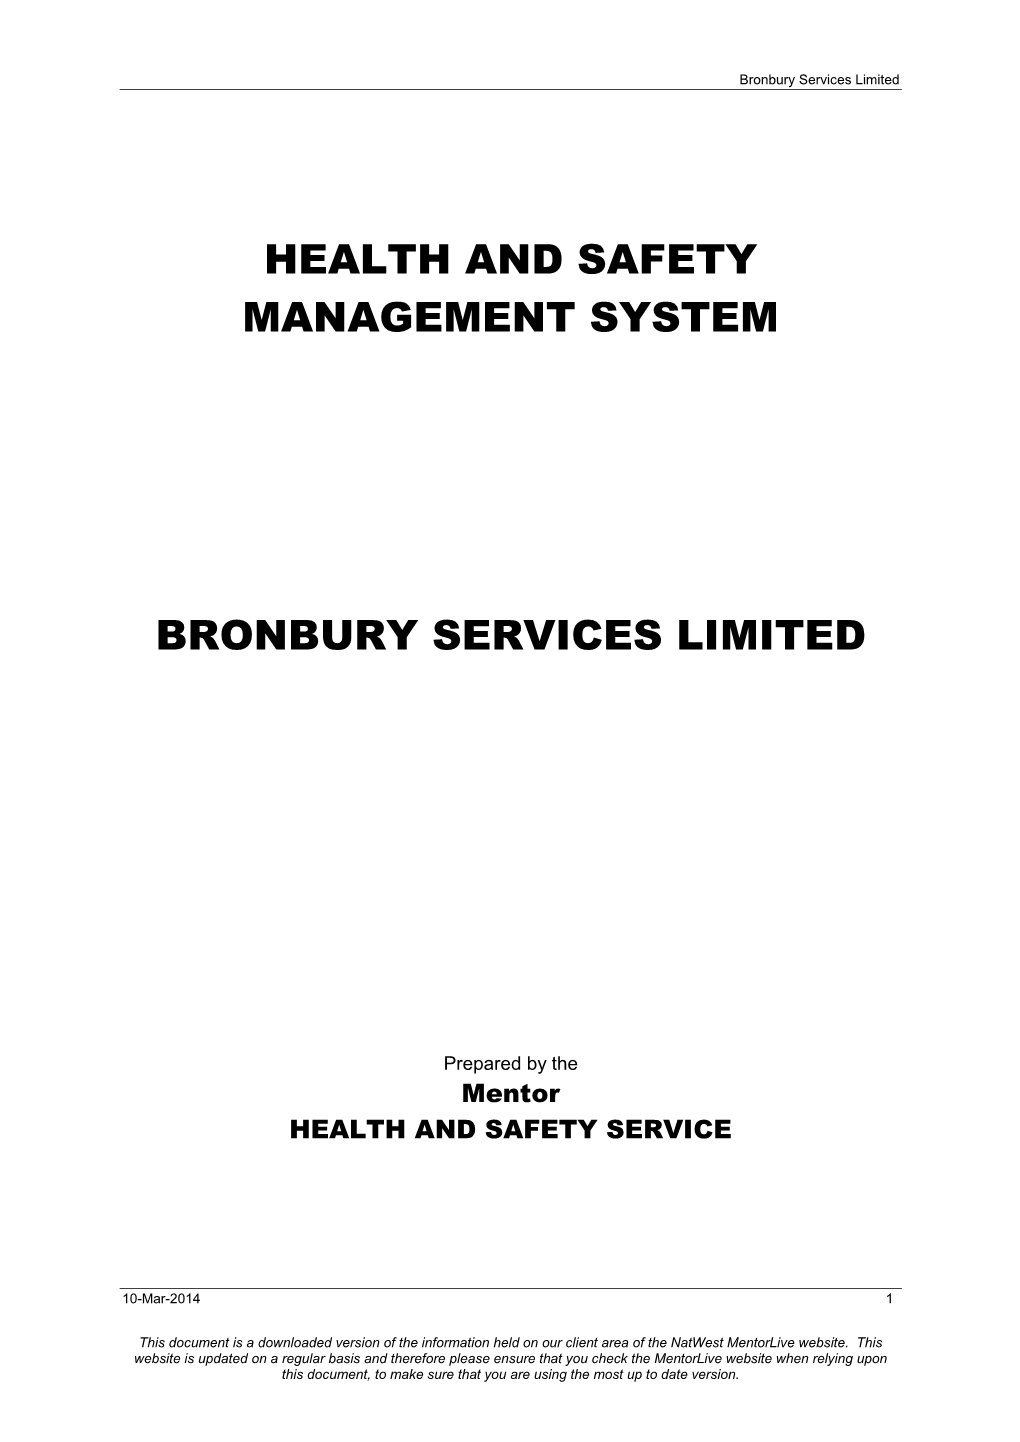 Bronbury Health and Safety Management System